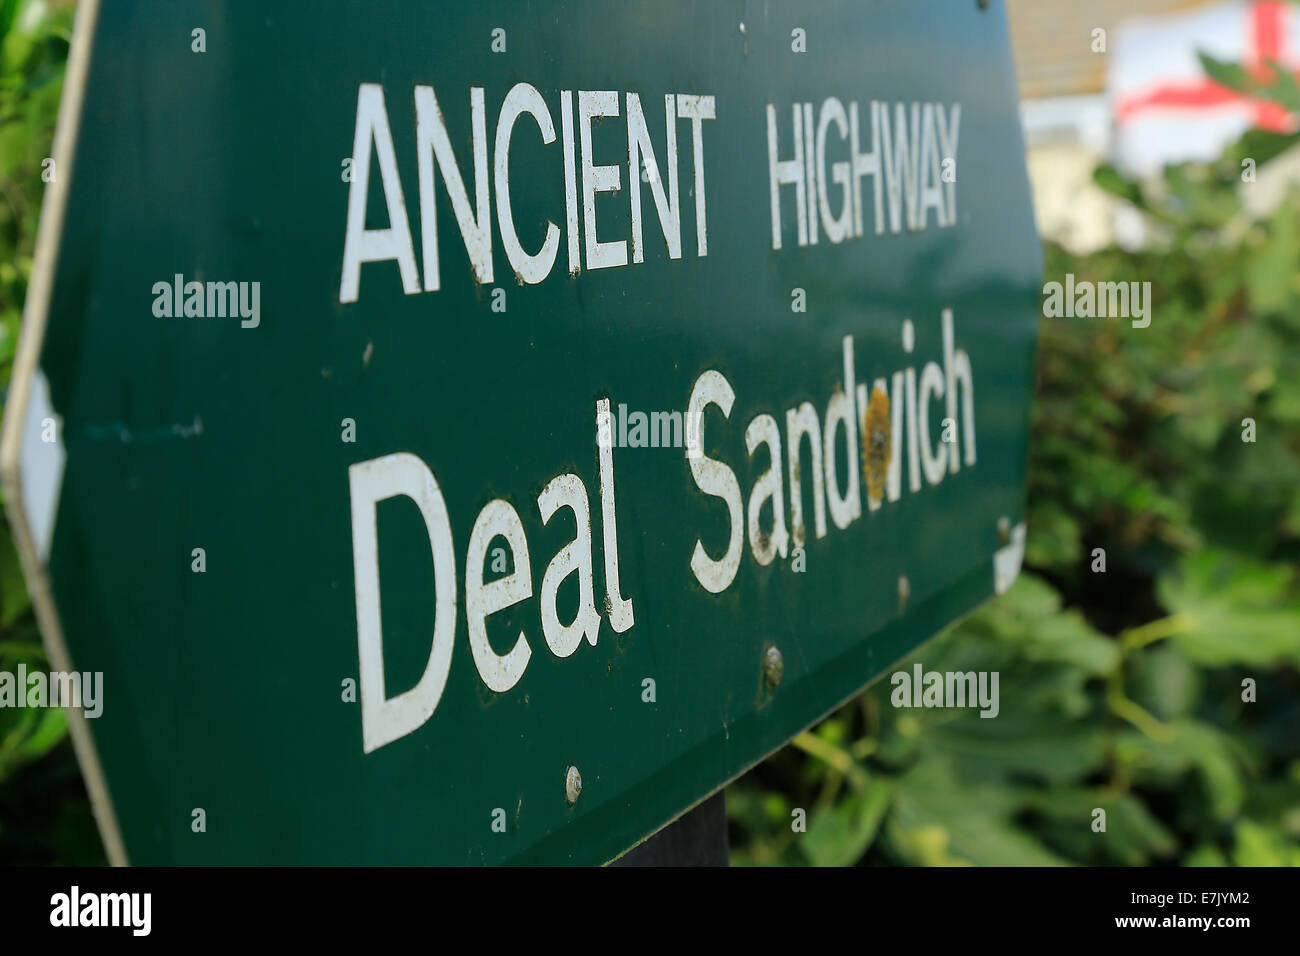 Ancient Highway sign Sandwich to Deal  with English flag in background. Stock Photo